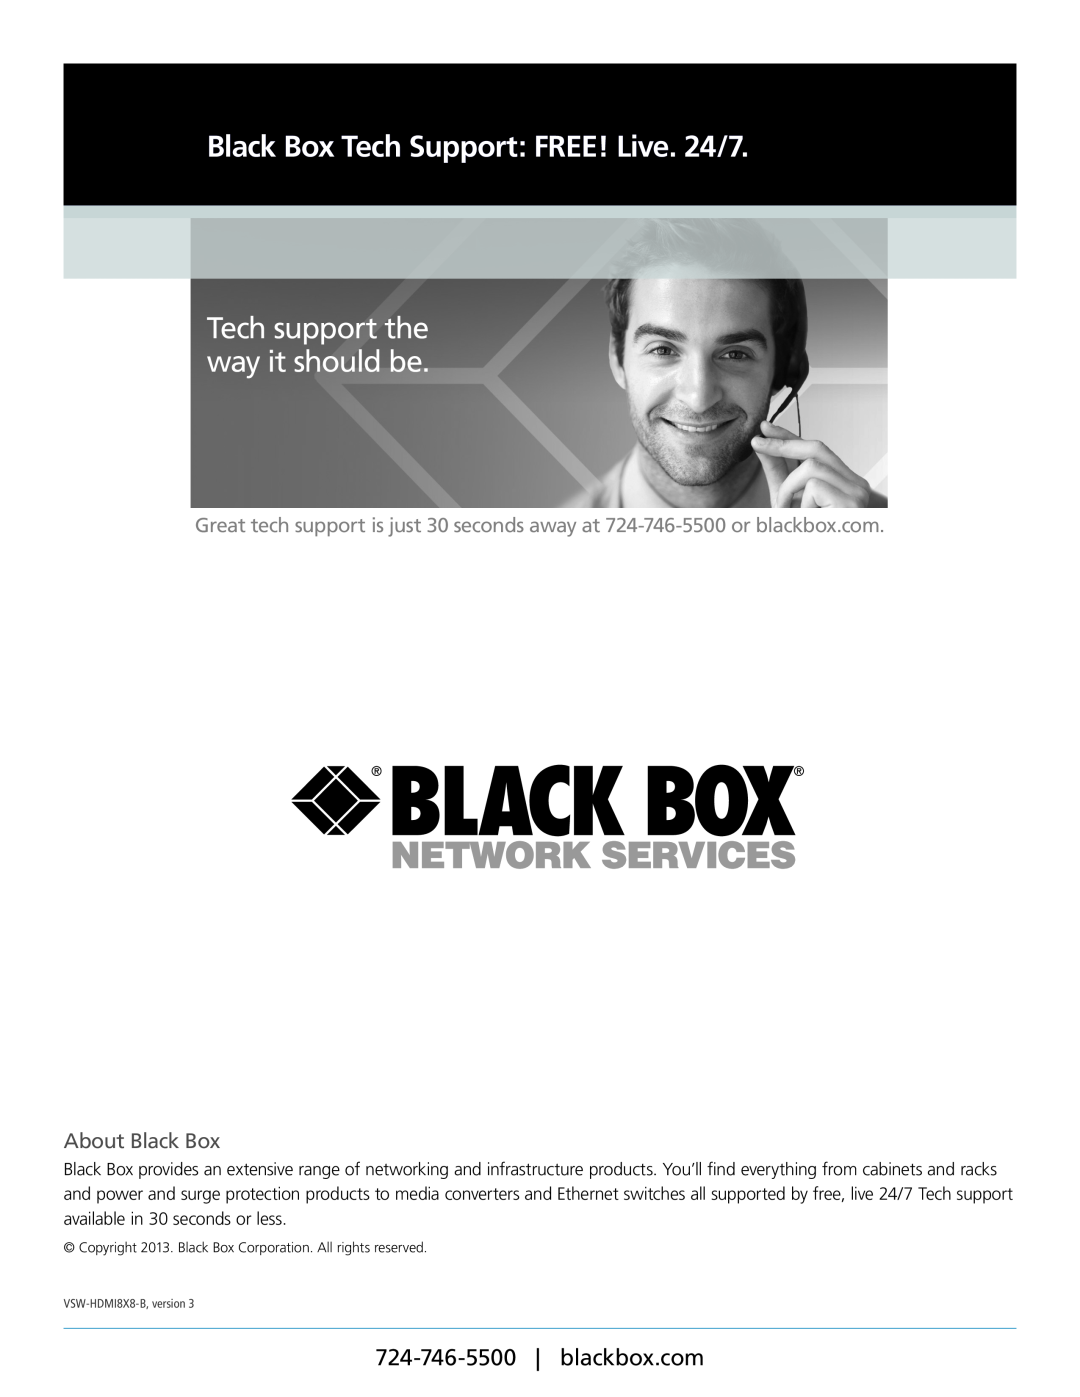 Black Box VSW-HDMI8X8-B manual Black Box Tech Support FREE! Live. 24/7, Tech support the way it should be, About Black Box 